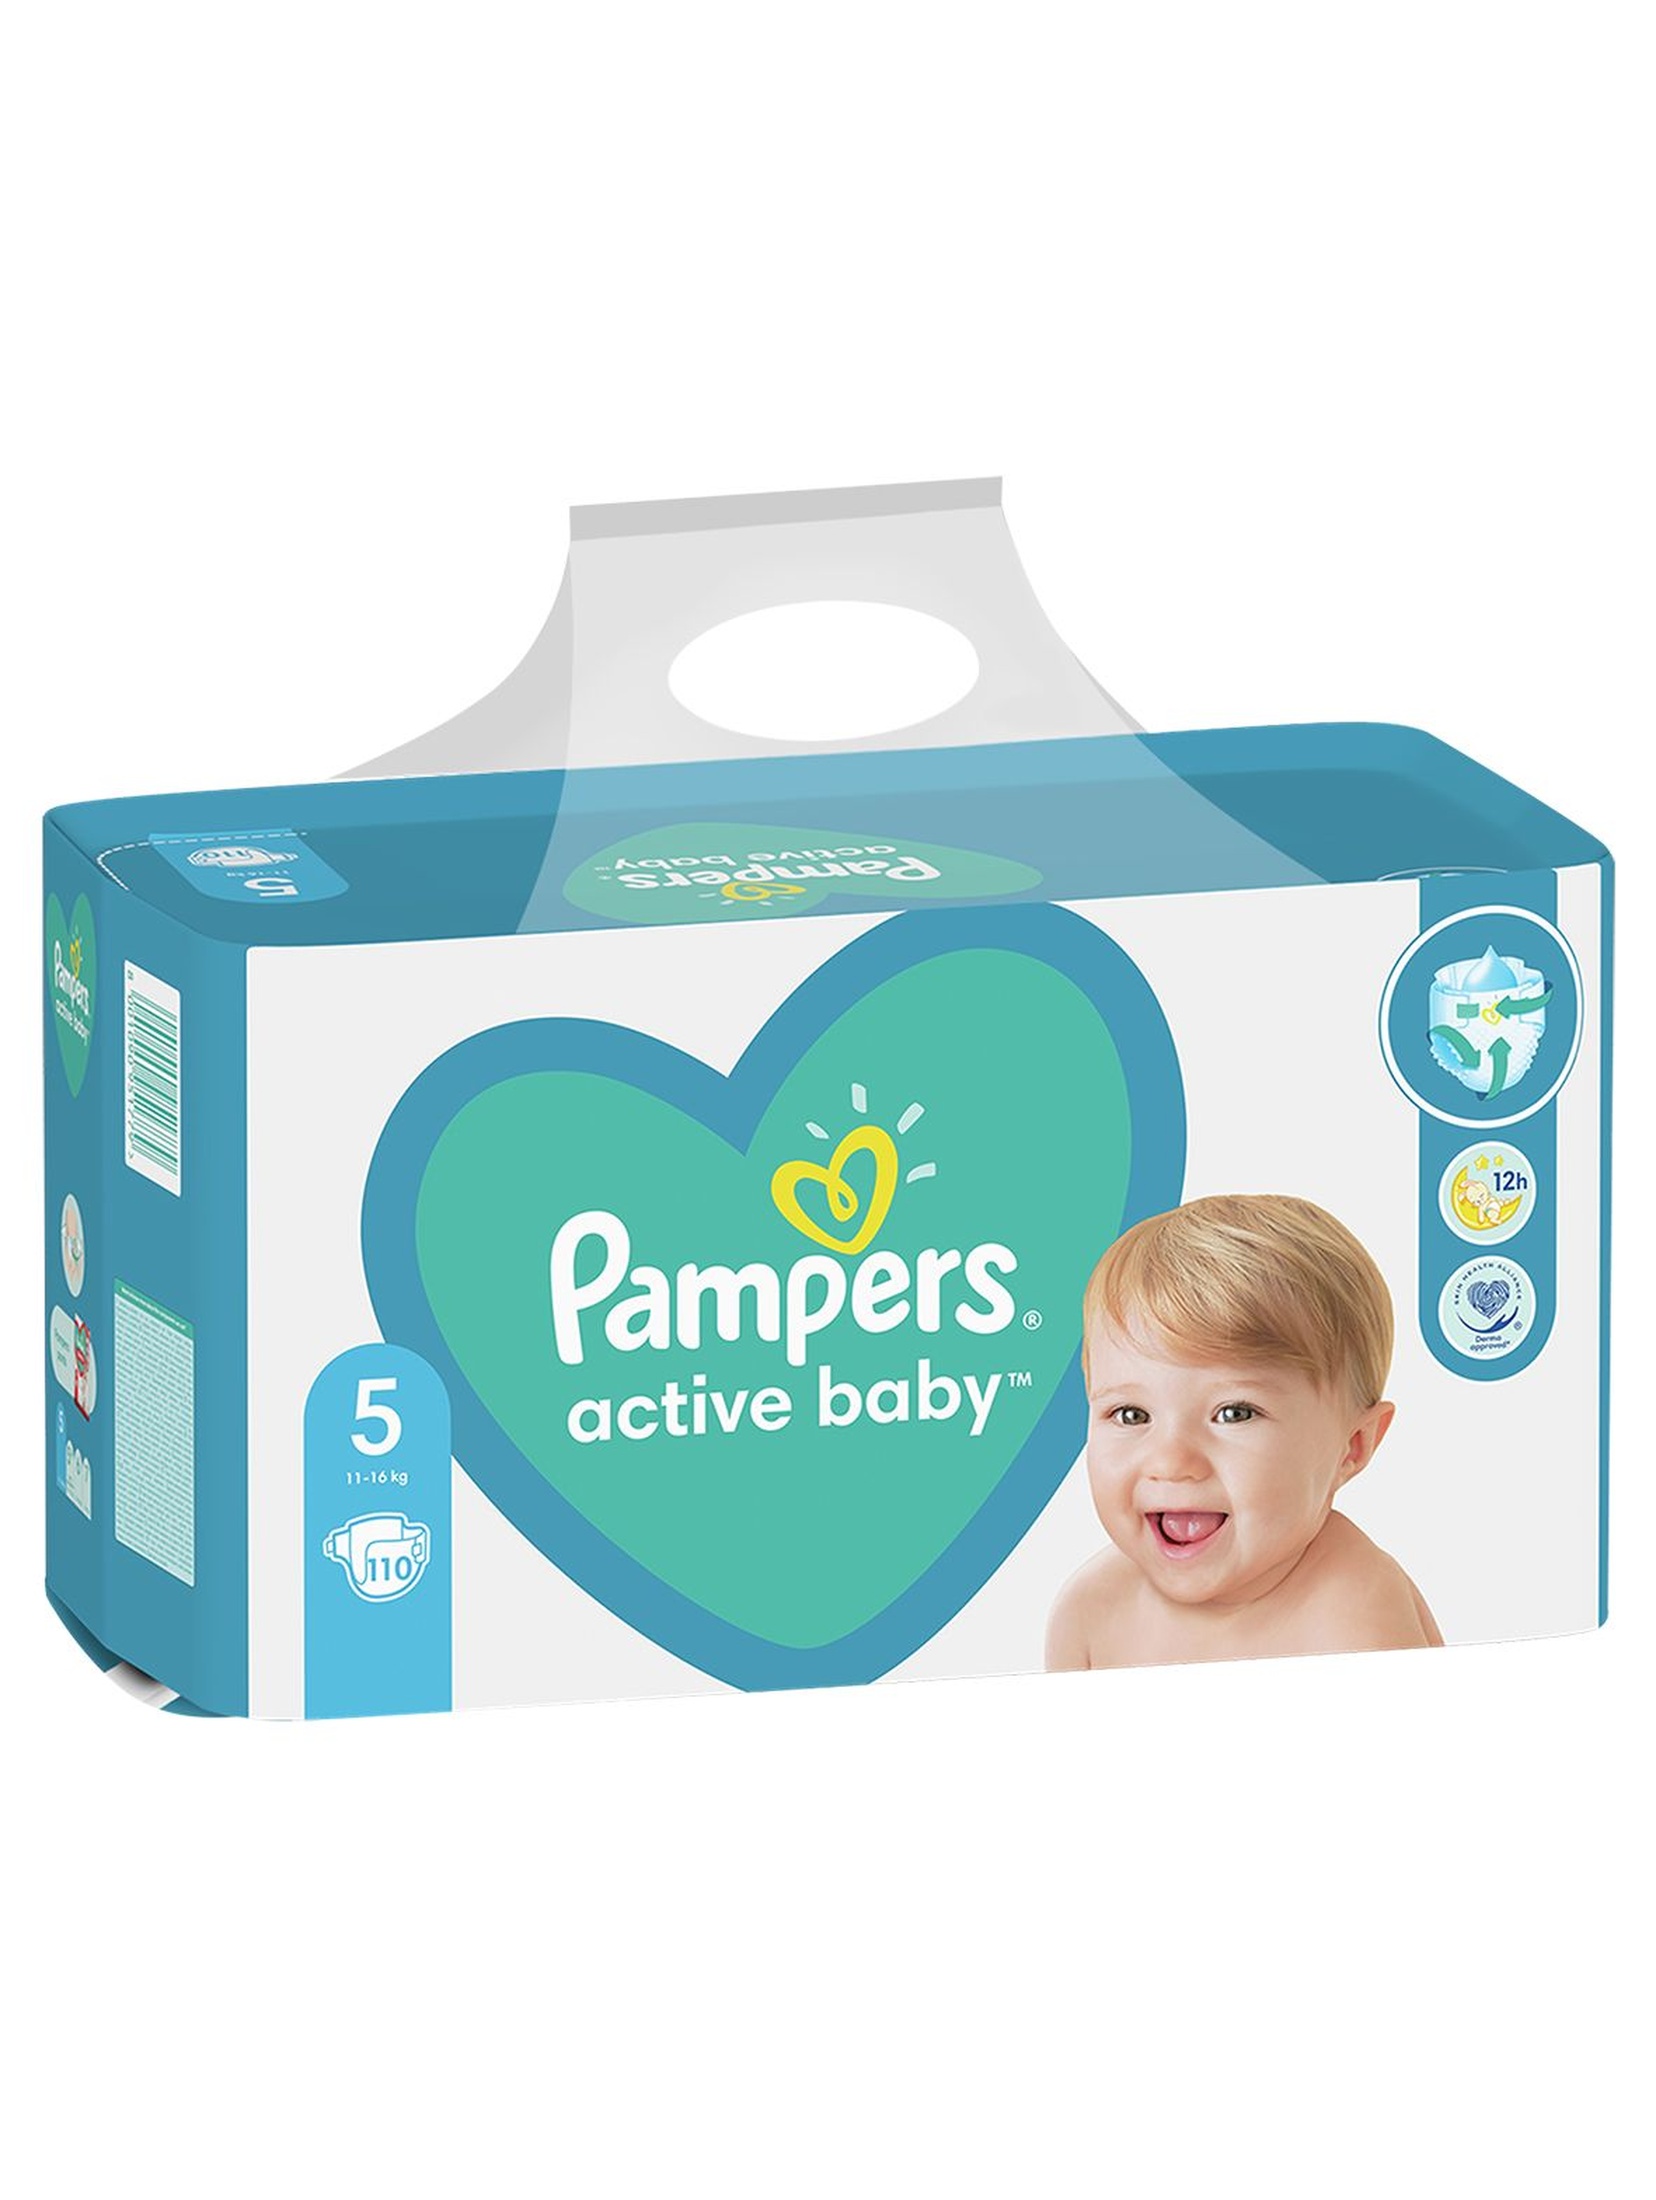 Pampers Active Baby, rozmiar 5, 110szt, 11-16kg